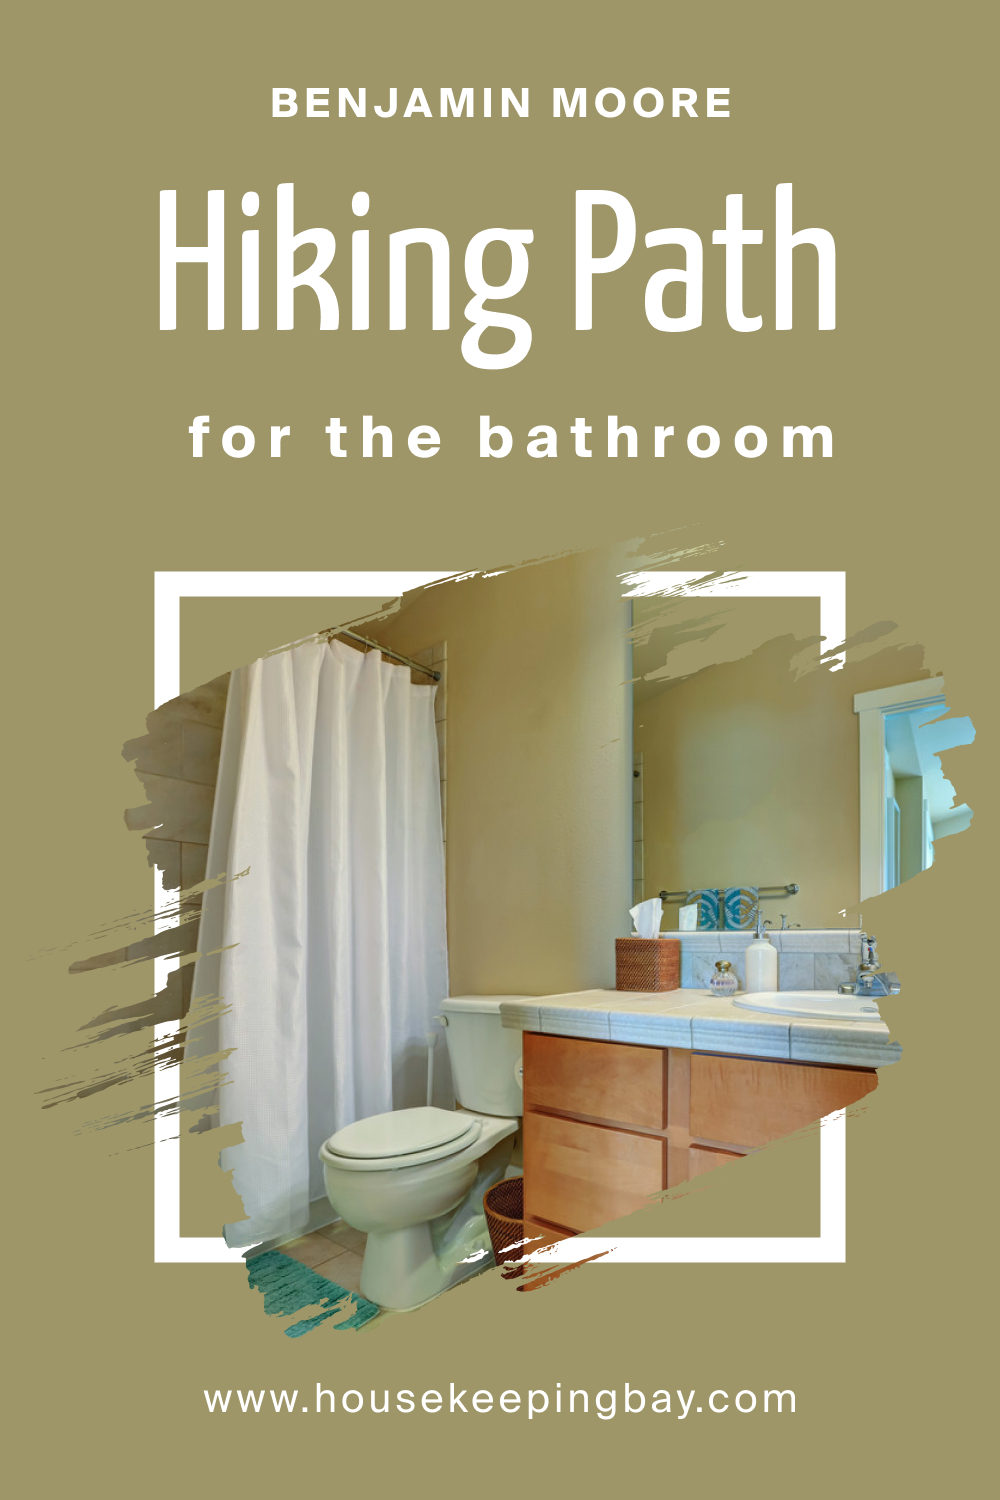 How to Use BM Hiking Path 524 in the Bathroom?